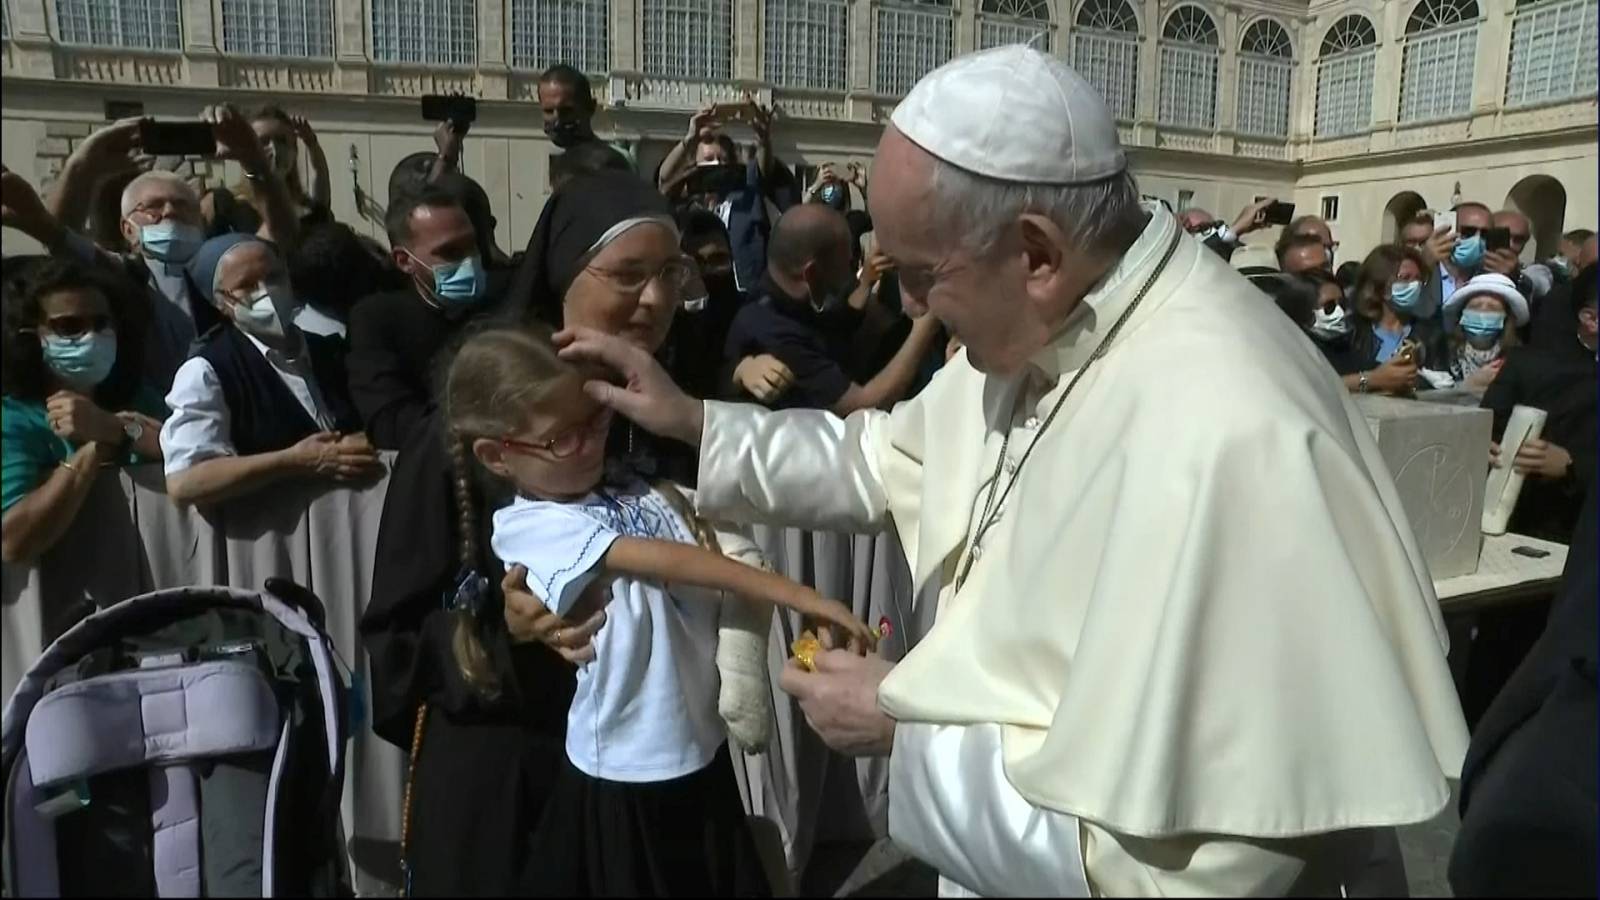 Pope Francis blesses a young girl as he leaves the first weekly general audience to readmit the public since the coronavirus (COVID-19) outbreak in the San Damaso courtyard